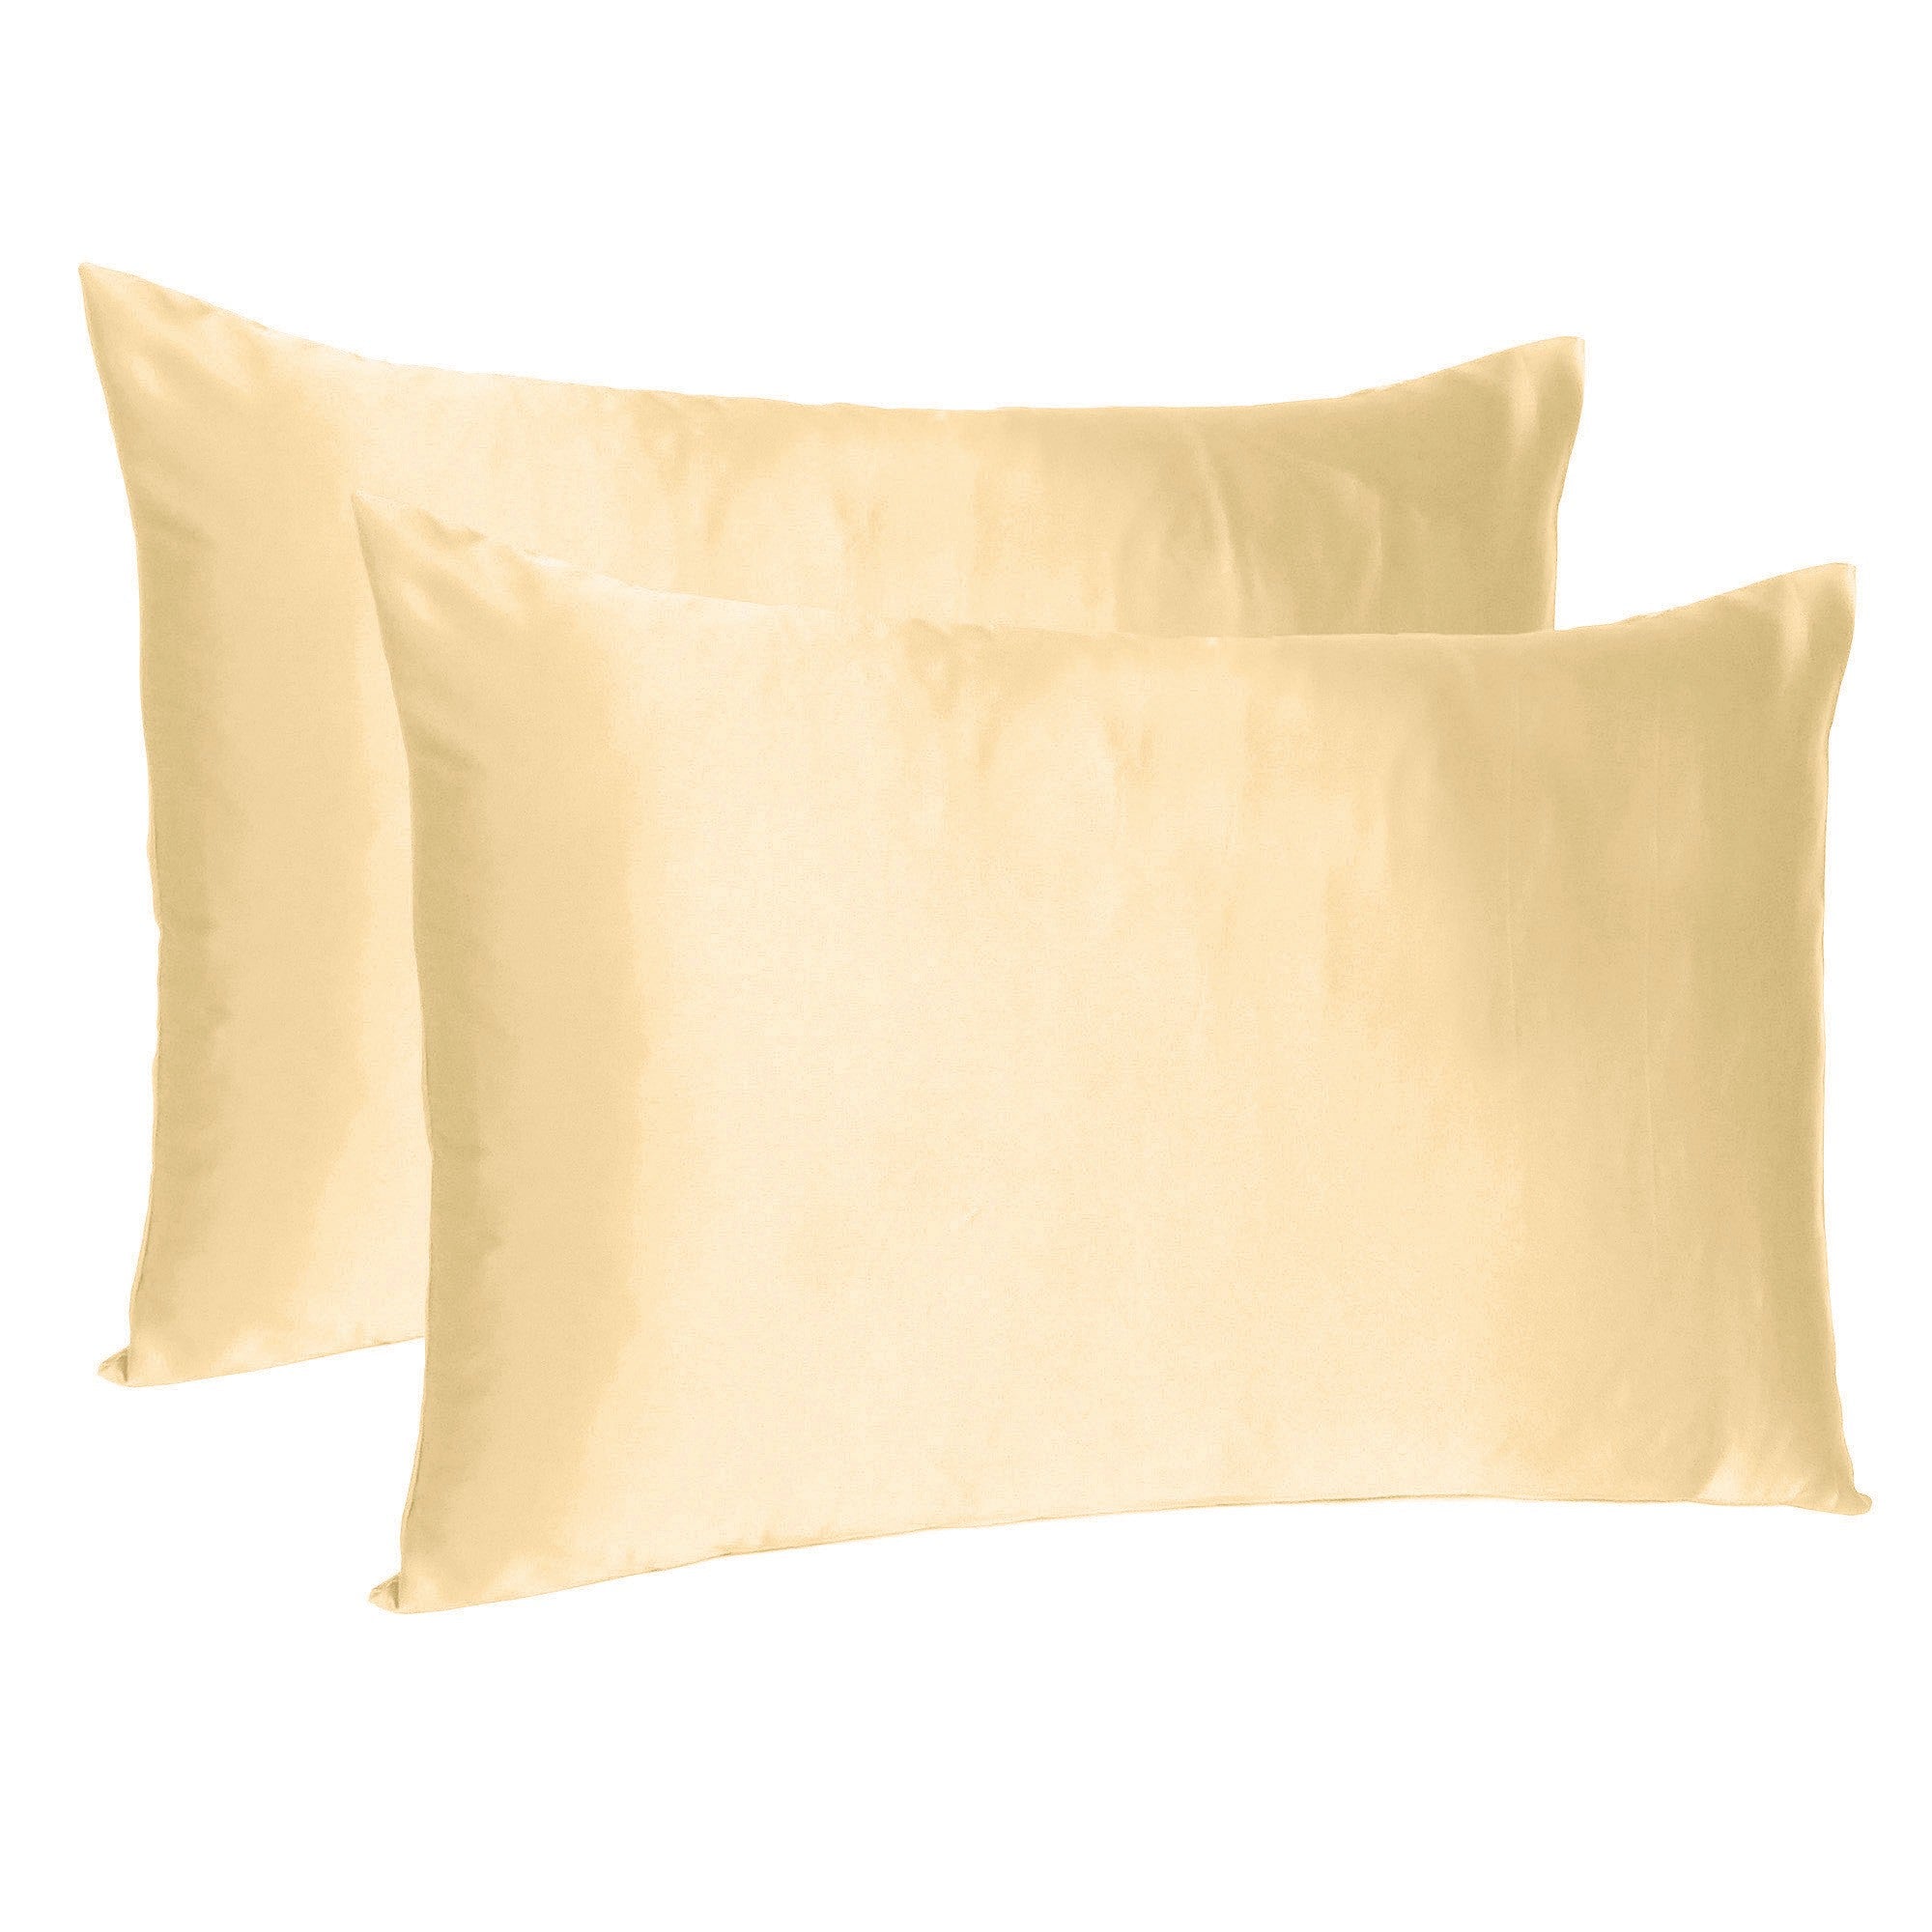 Pale-Peach-Dreamy-Set-Of-2-Silky-Satin-King-Pillowcases-Bed-Sheets